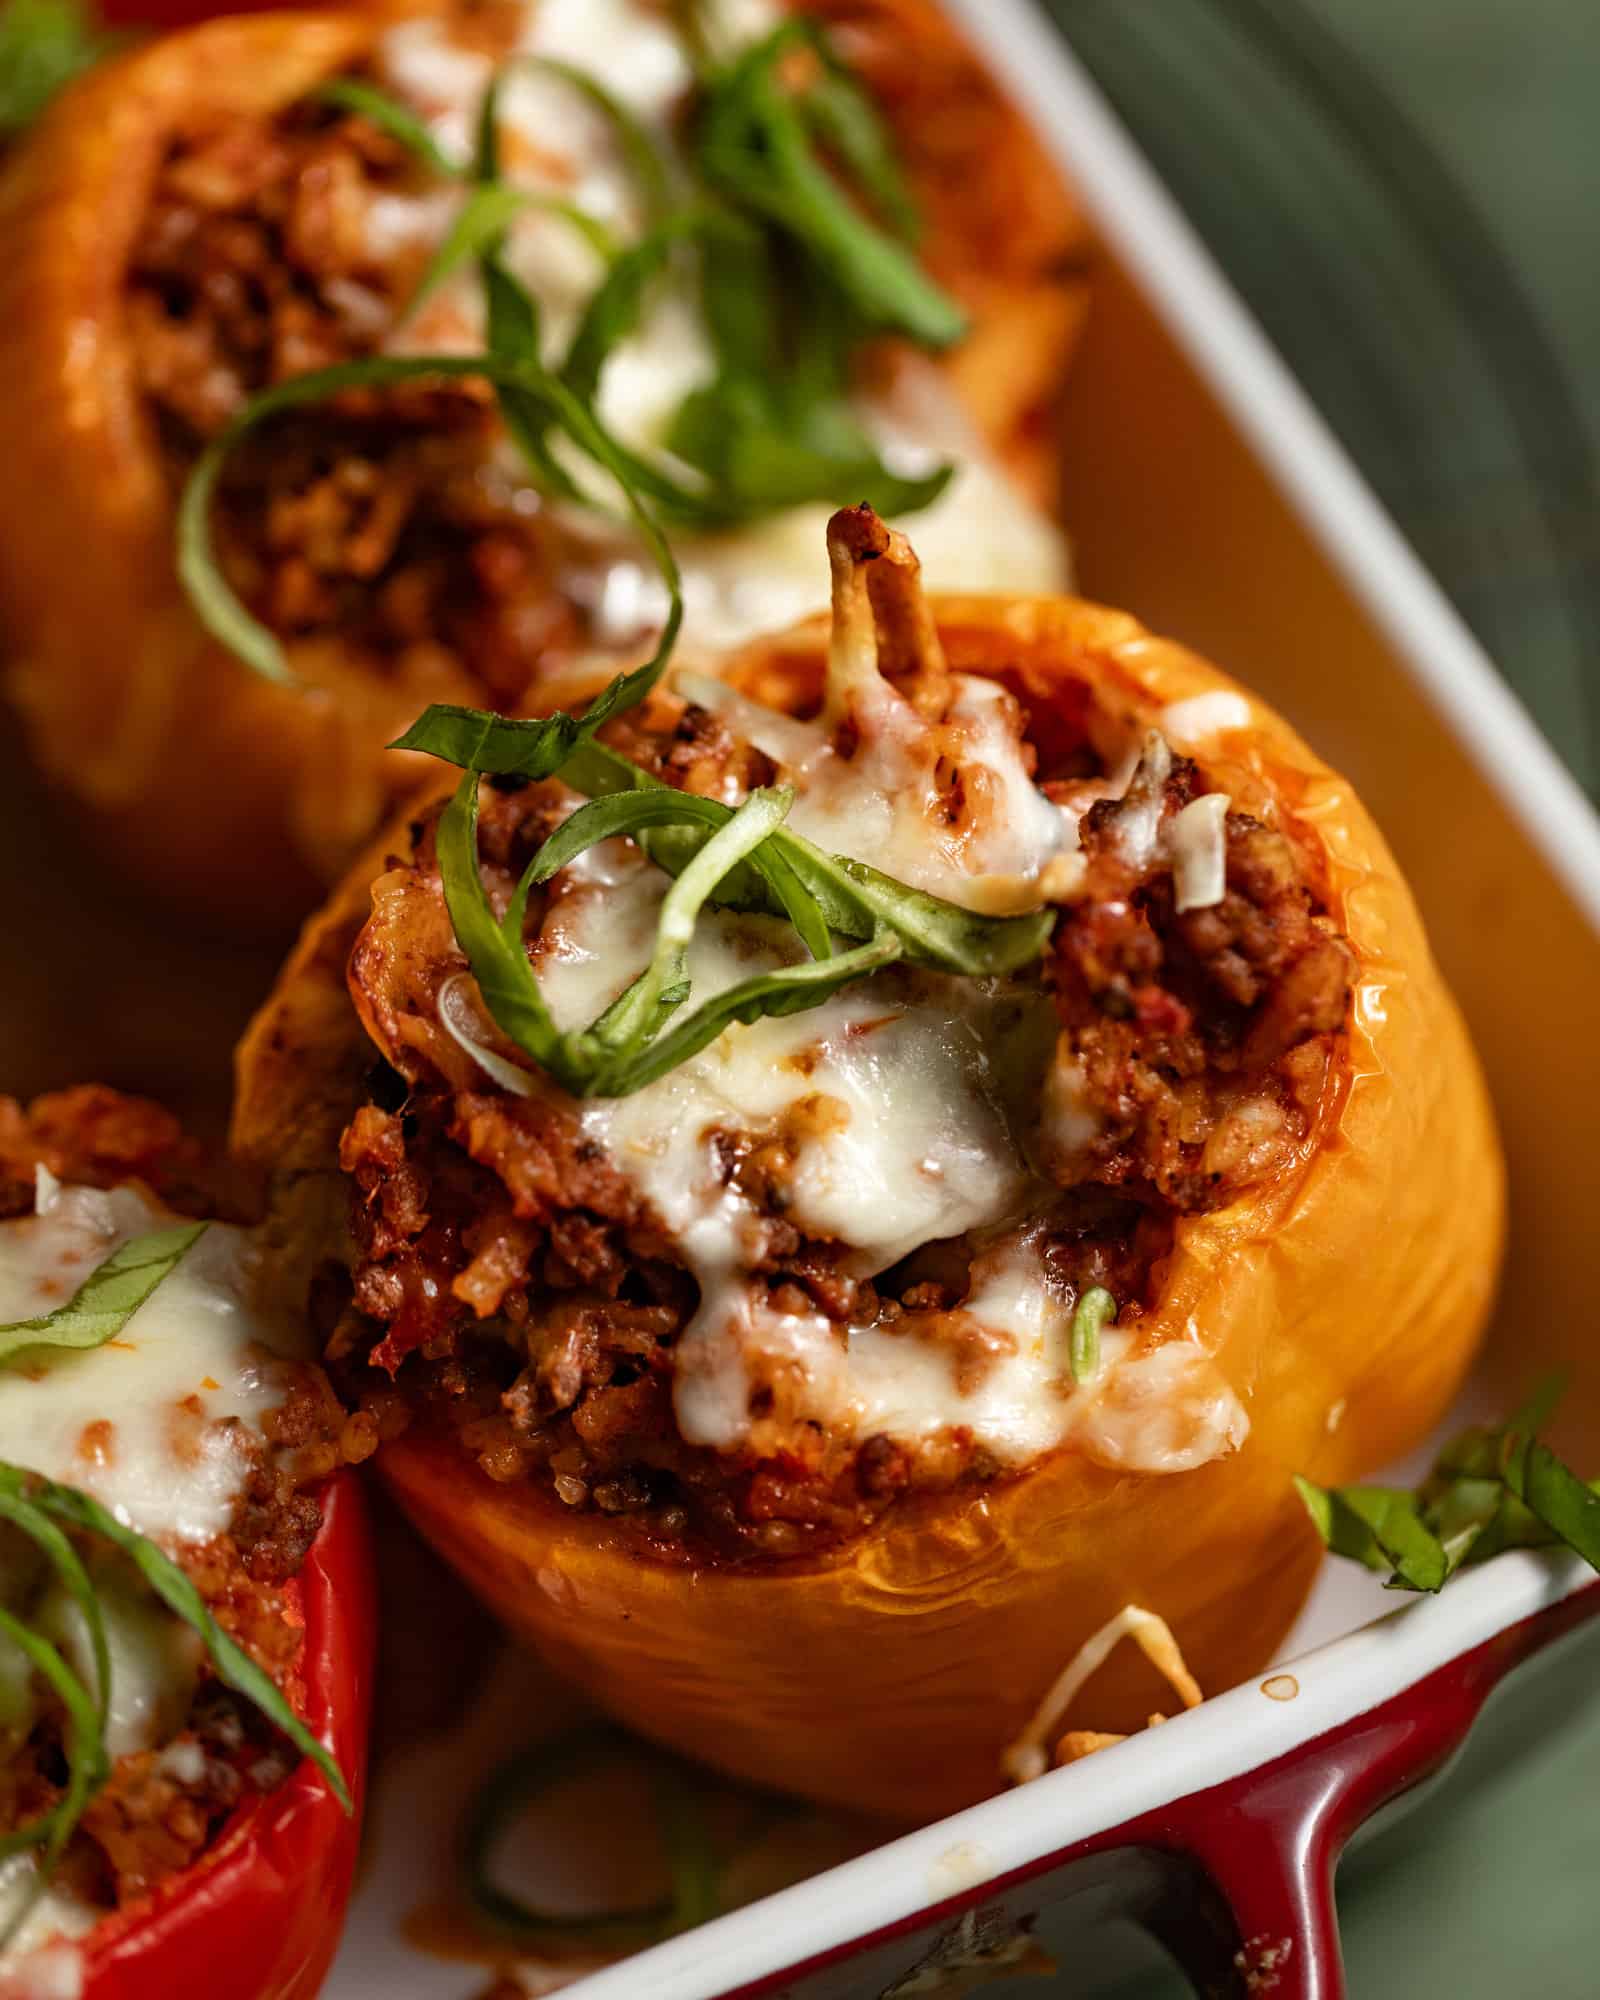 Beef stuffed peppers in a baking dish.